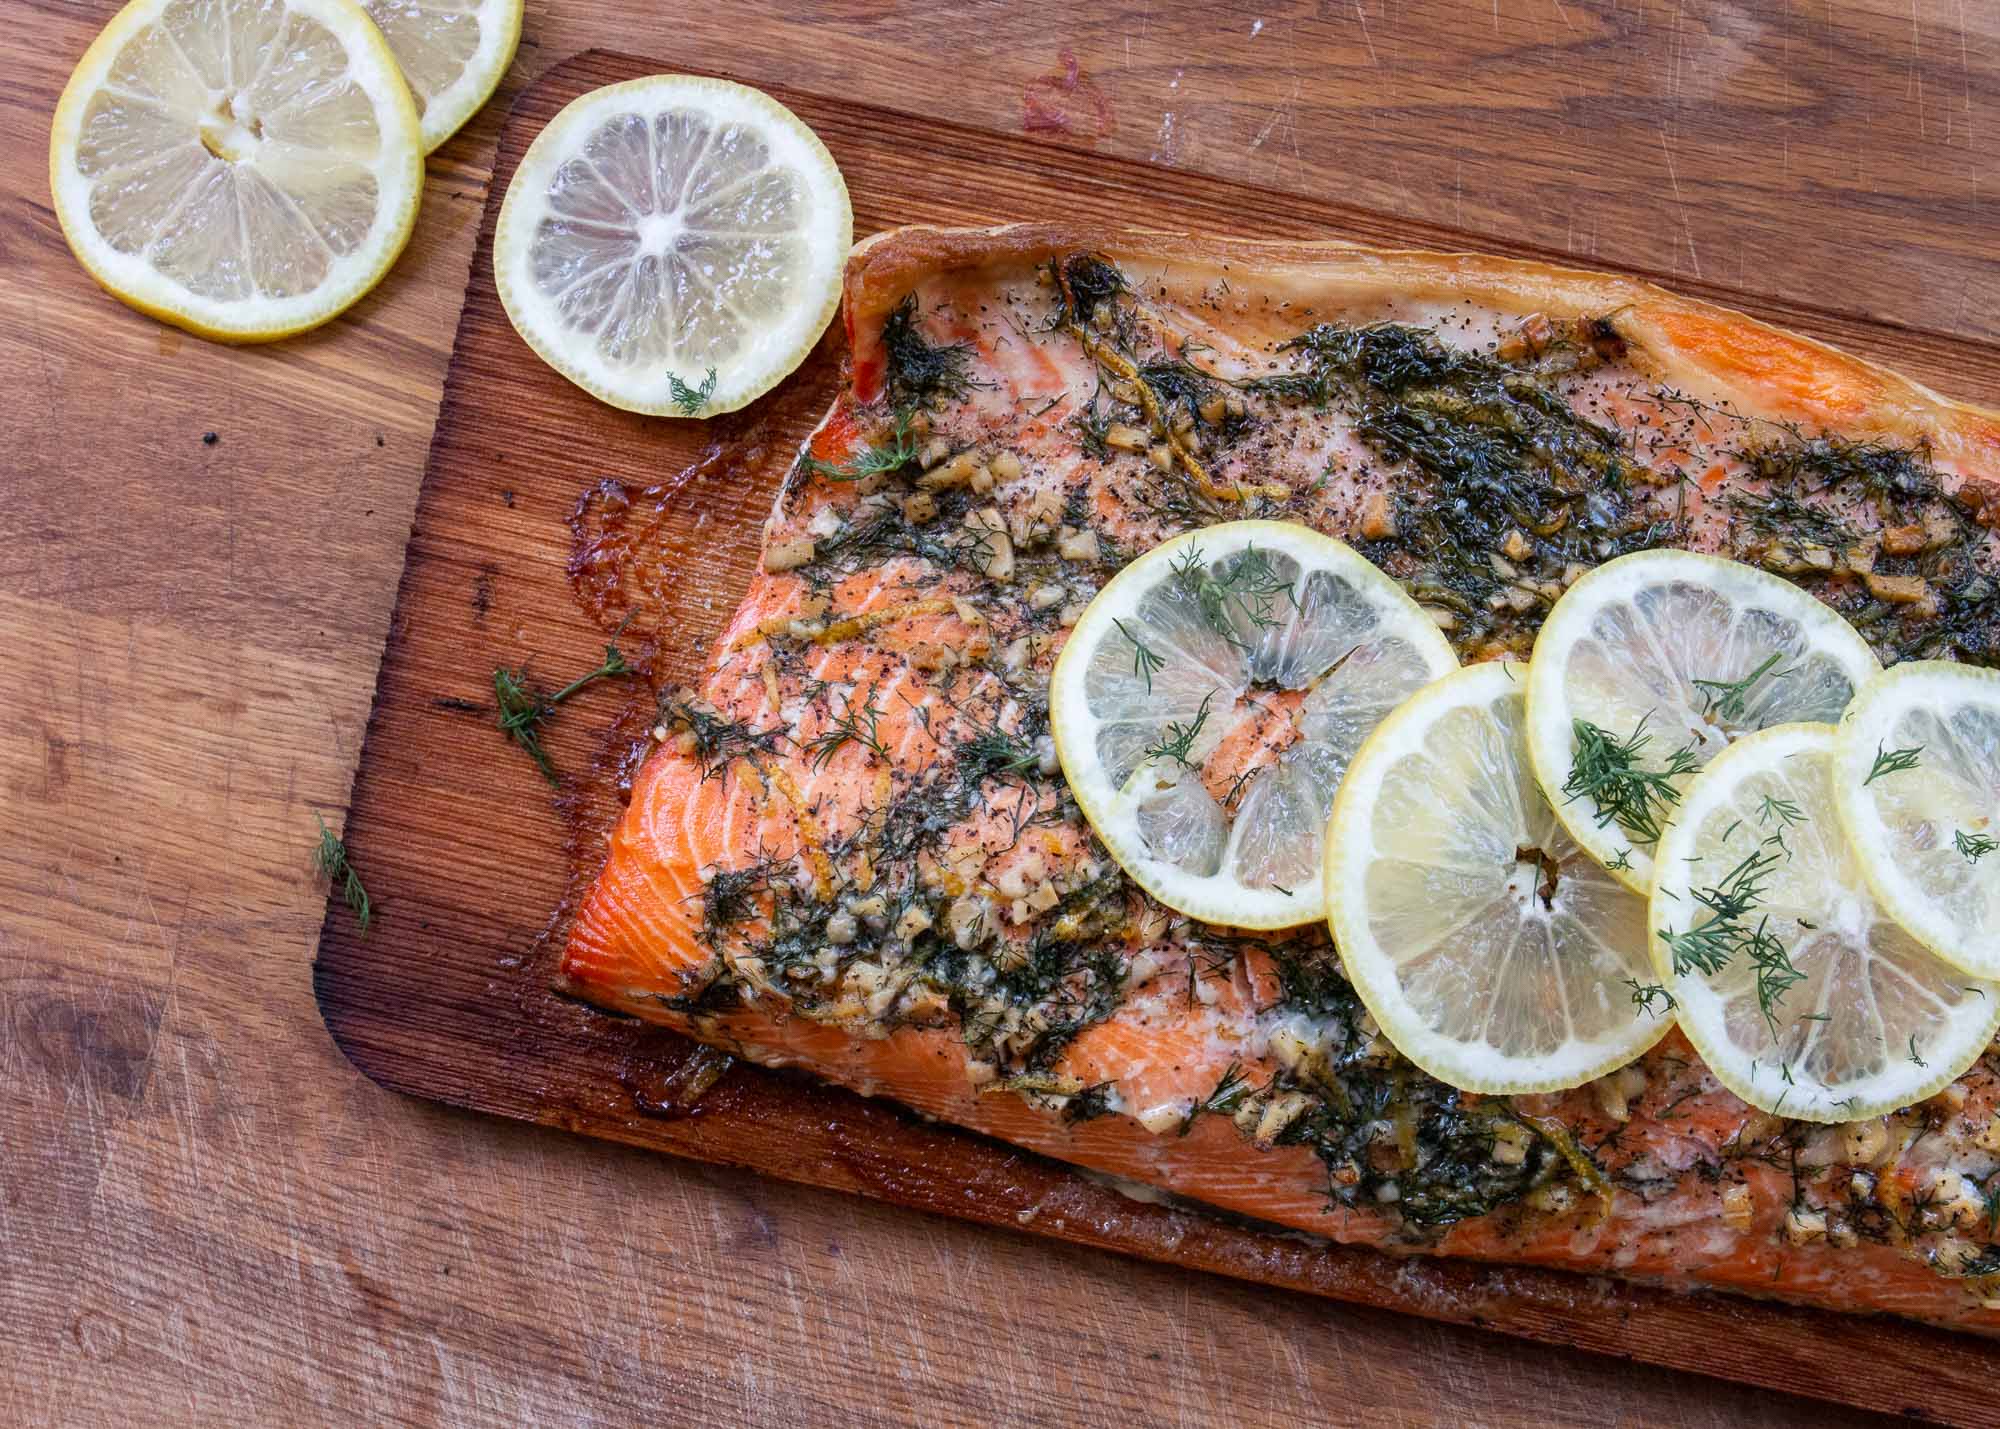 Cedar Plank Grilled Salmon With Garlic Lemon And Dill Recipe Allrecipes,When Do Puppies Eyes Open Up